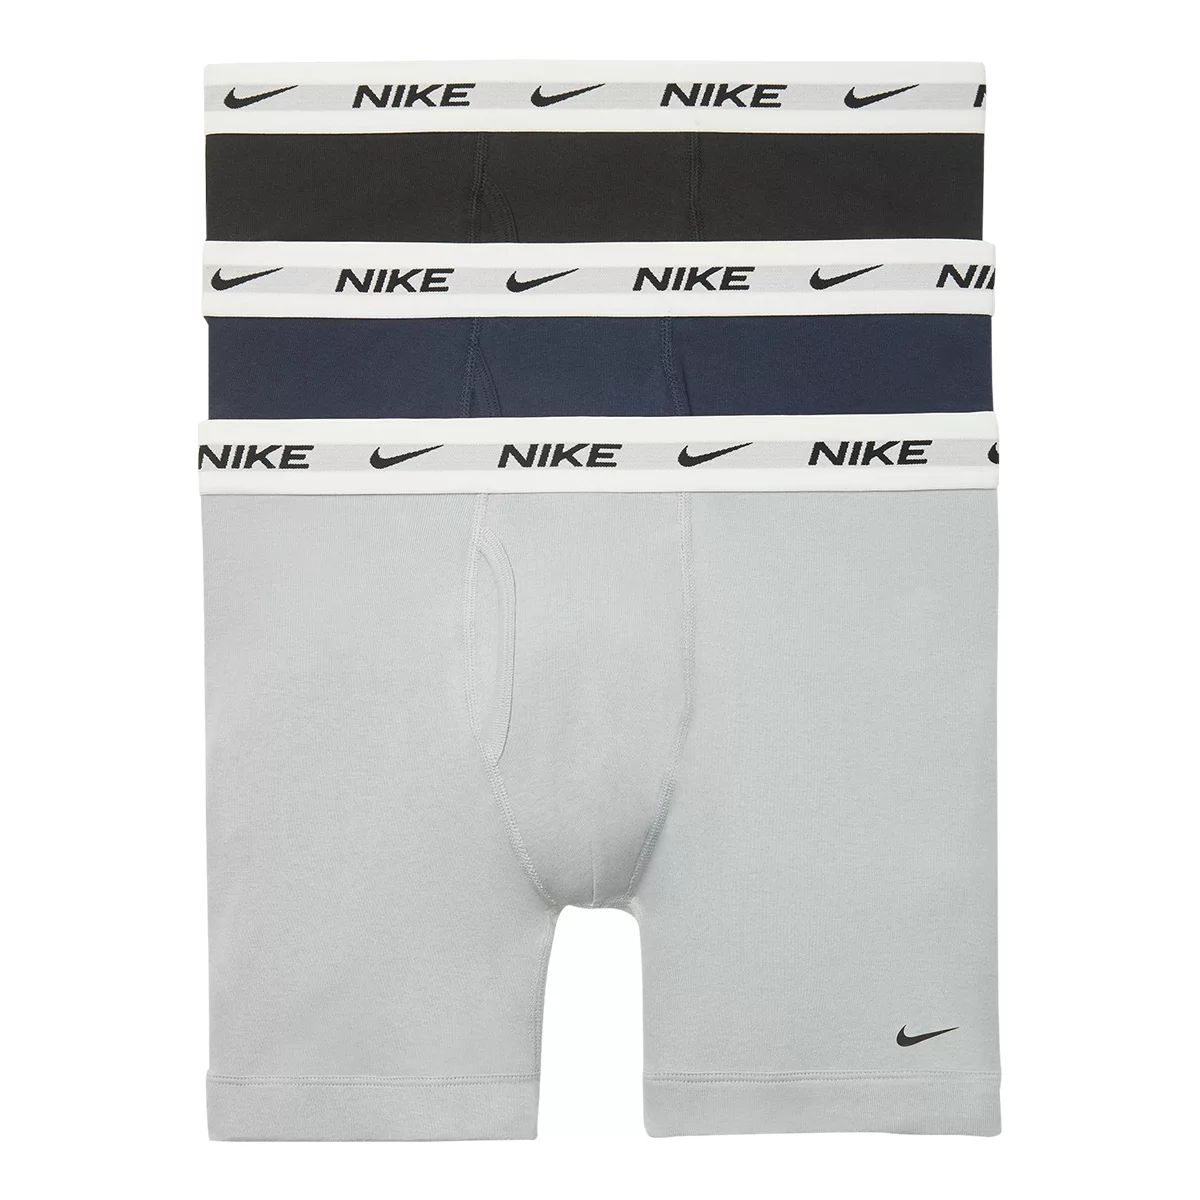 Nike / Men's Everyday Cotton Stretch Boxer Briefs - 3 Pack